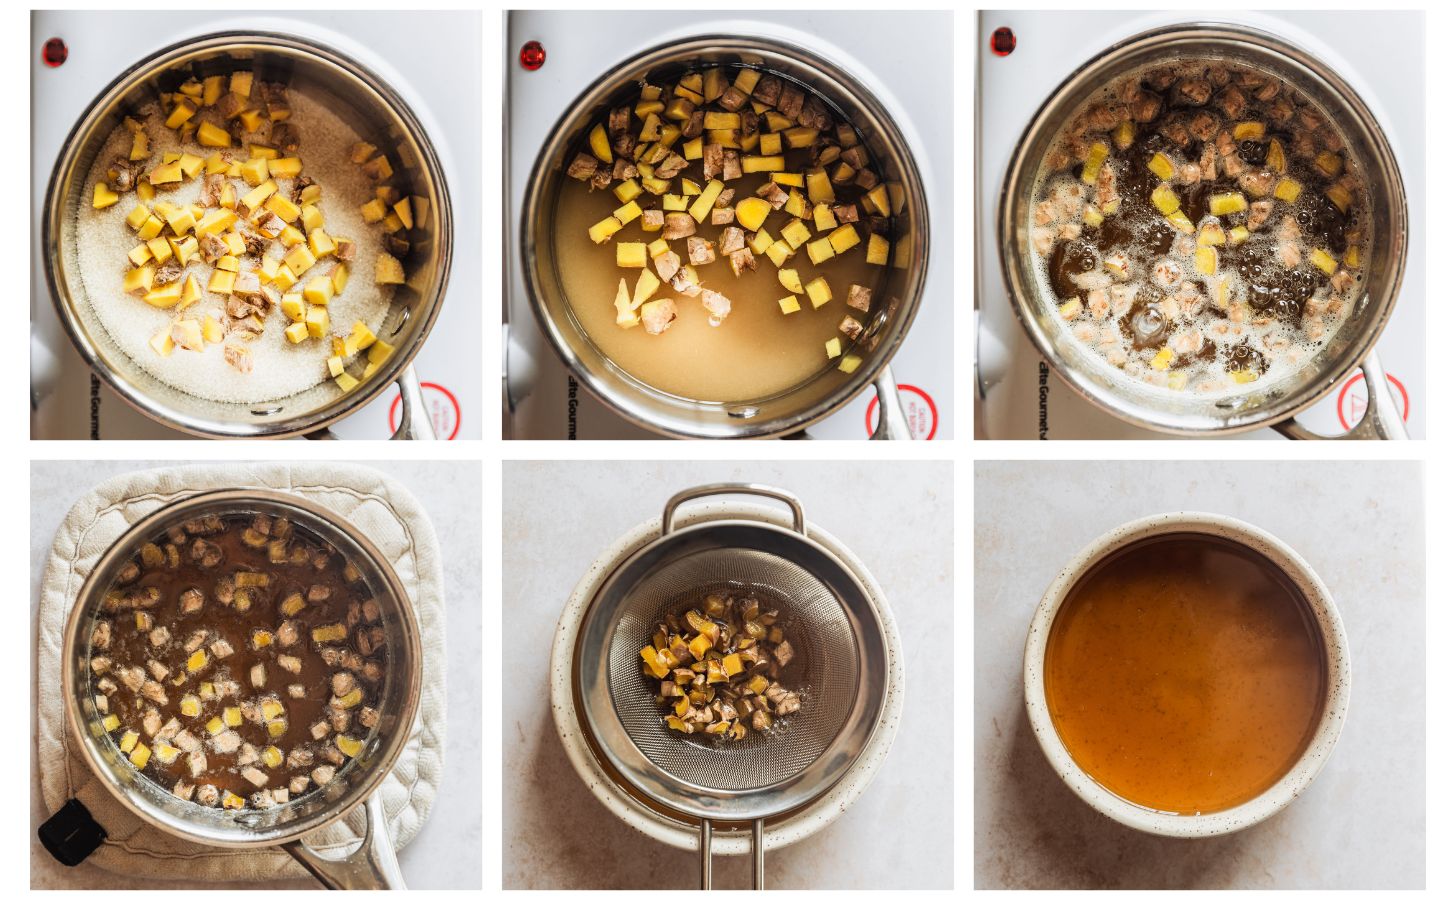 Six steps to making ginger syrup. In photo 1, a silver pot has fresh ginger and sugar. In photo 2, the pot has water in it. In photo 3, the syrup is boiling. In photo 4, the syrup is steeping on a beige counter. In photo 5, the syrup is being strained into a white bowl. In photo 6, the syrup is in a white bowl on a beige counter.